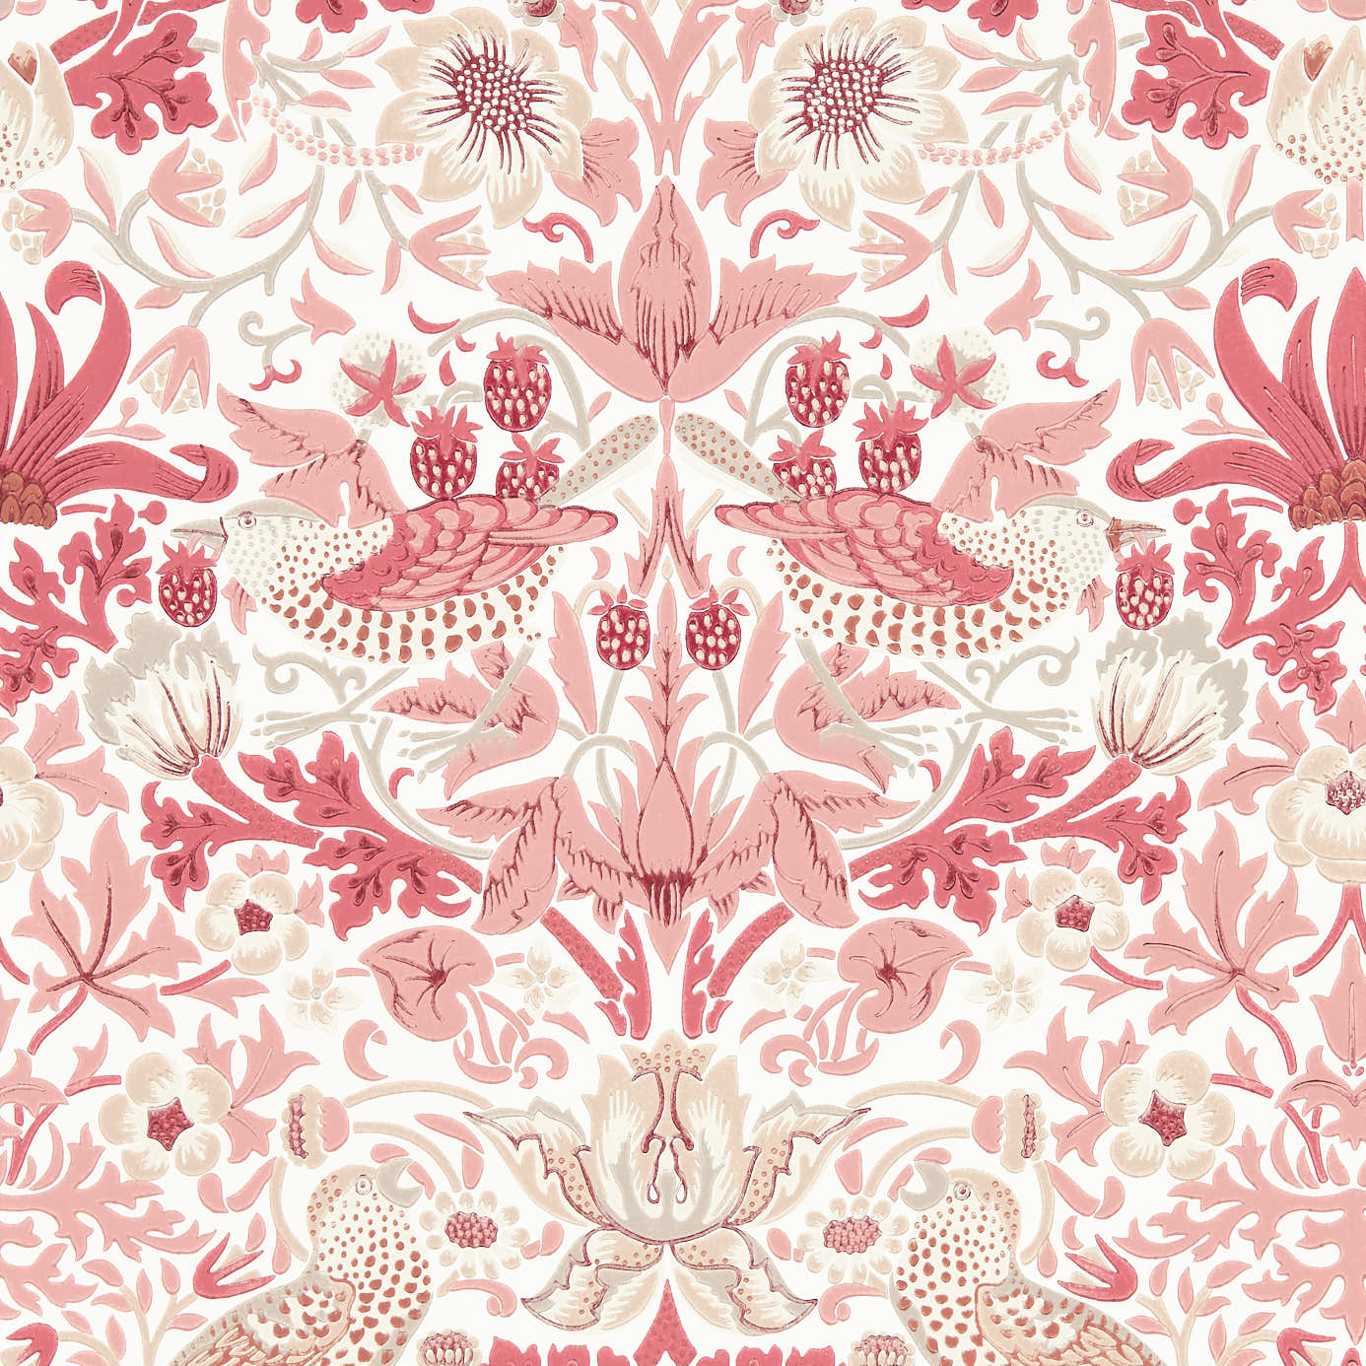 Simply Strawberry Thief Madder Wallpaper MSIM217059 by Morris & Co